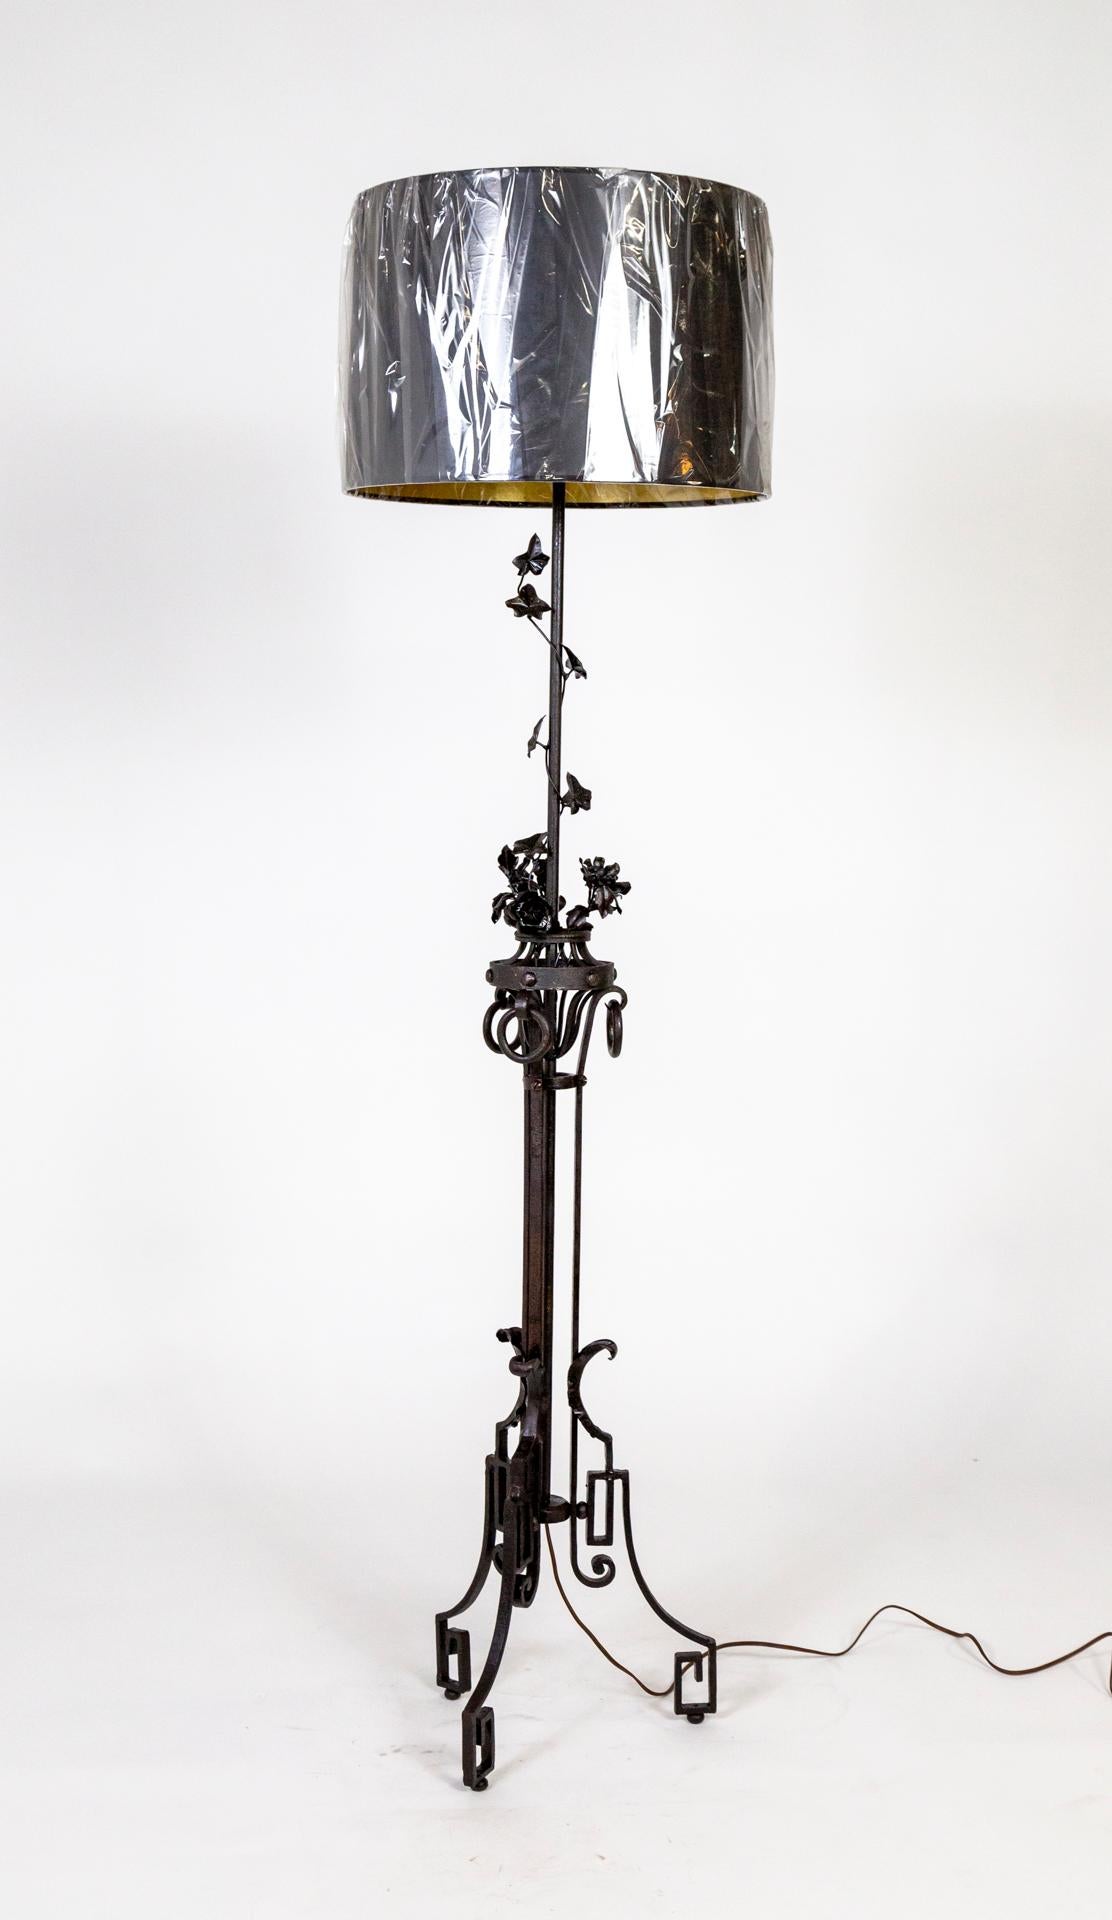 A French, hand-wrought iron, Art Deco, floor lamp made circa 1910, with a Greek key tripod base coupled with Art Nouveau flourishes. Flowers and vines creep from a center basket adorned with heavy iron rings. Newly wired with a double pull chain,